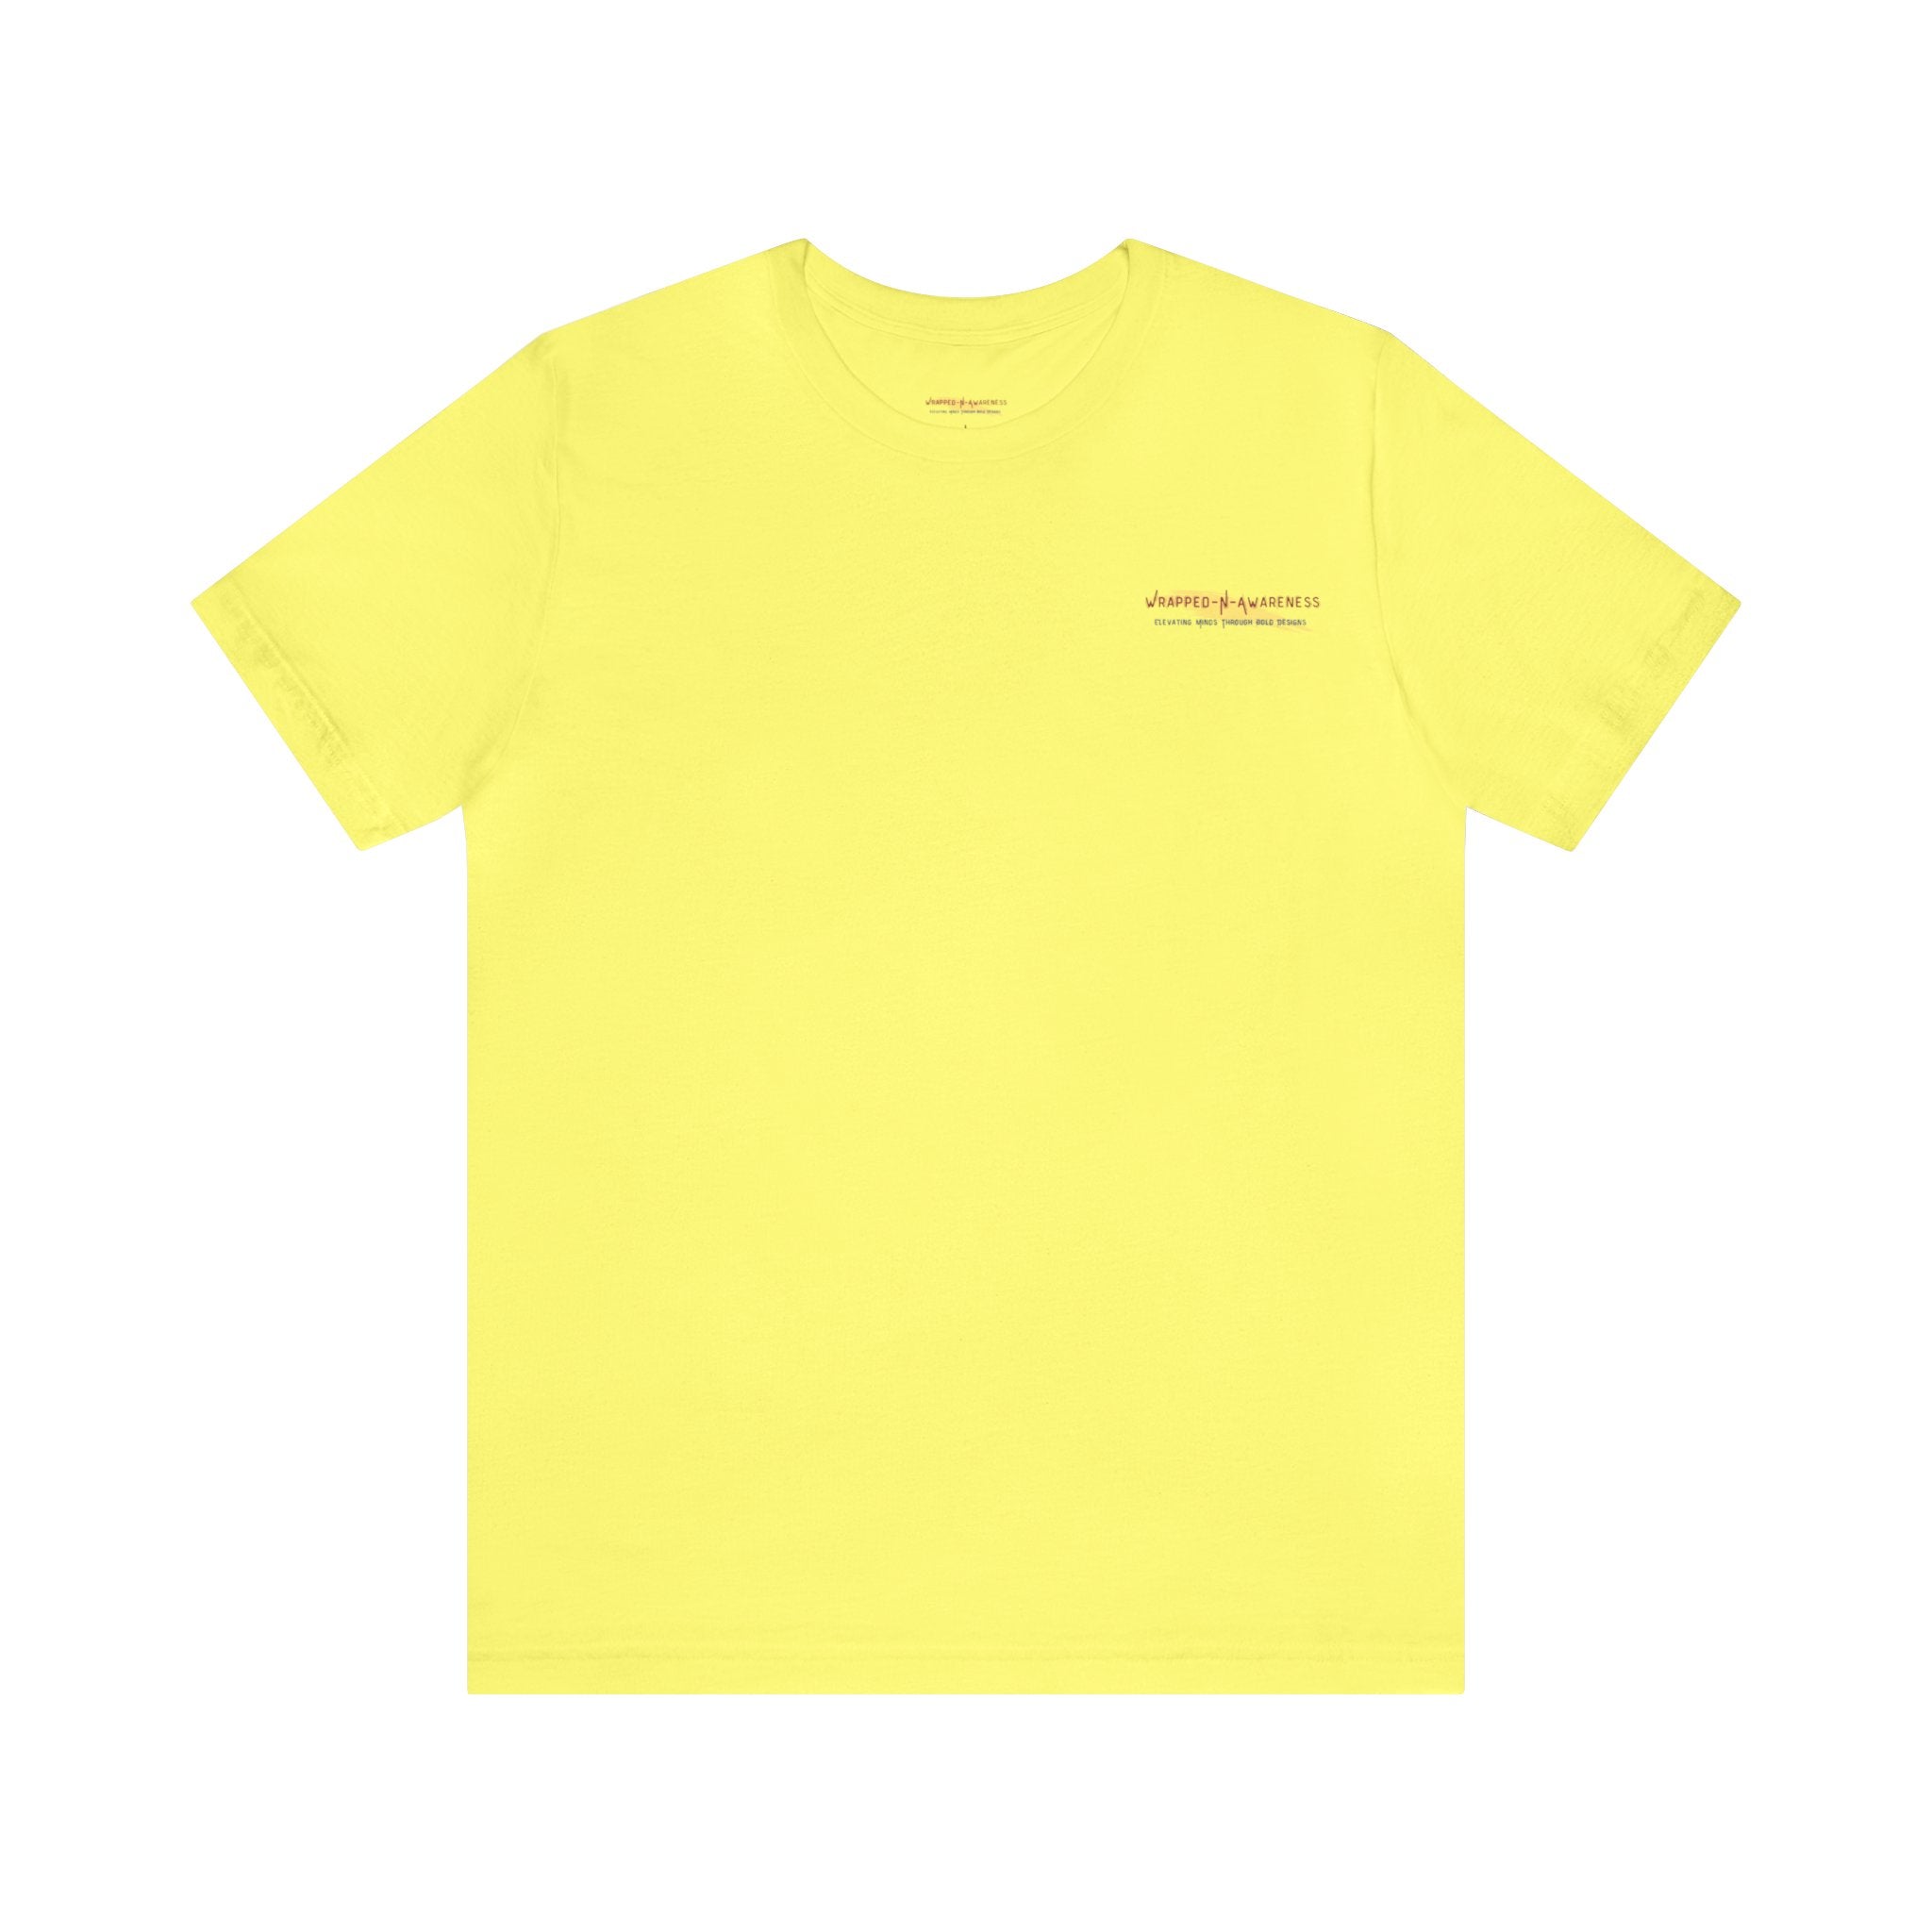 Progress Over Perfection Tee - Bella+Canvas 3001 Yellow Airlume Cotton Bella+Canvas 3001 Crew Neckline Jersey Short Sleeve Lightweight Fabric Mental Health Support Retail Fit Tear-away Label Tee Unisex Tee T-Shirt 5704934529557240137_2048 Printify